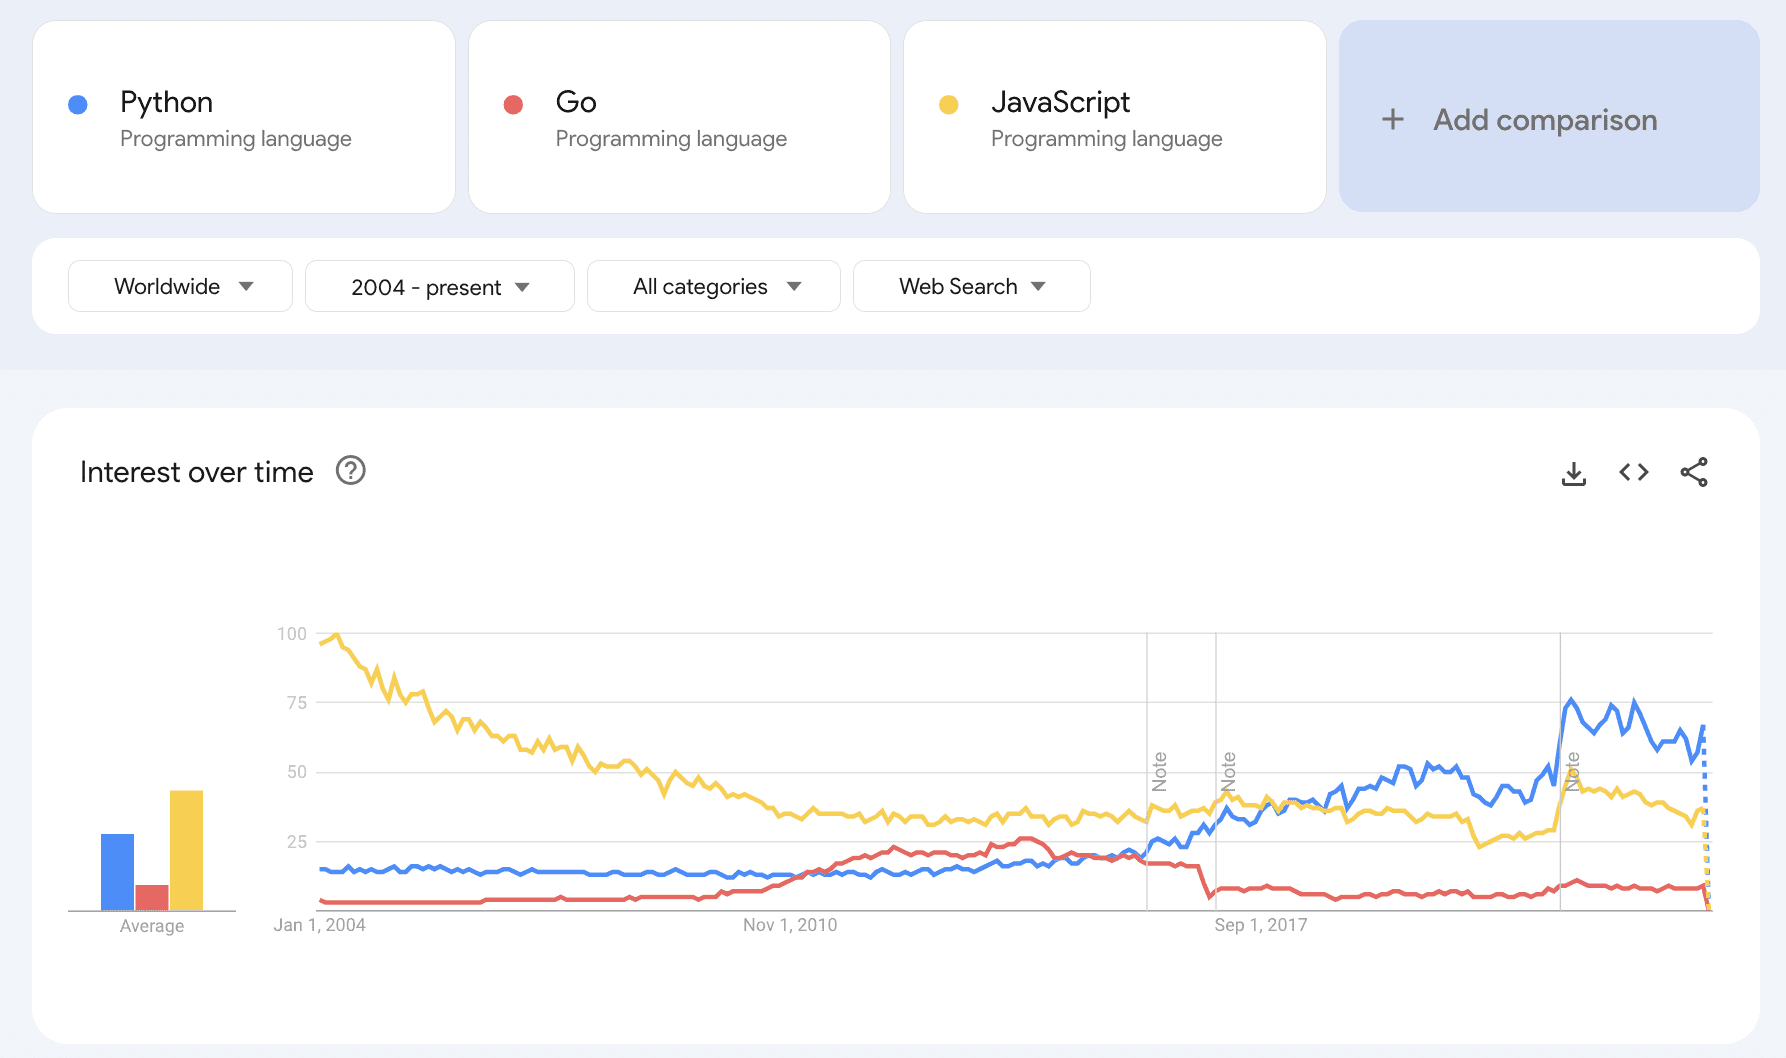 python go and javascript google trends - image31.png